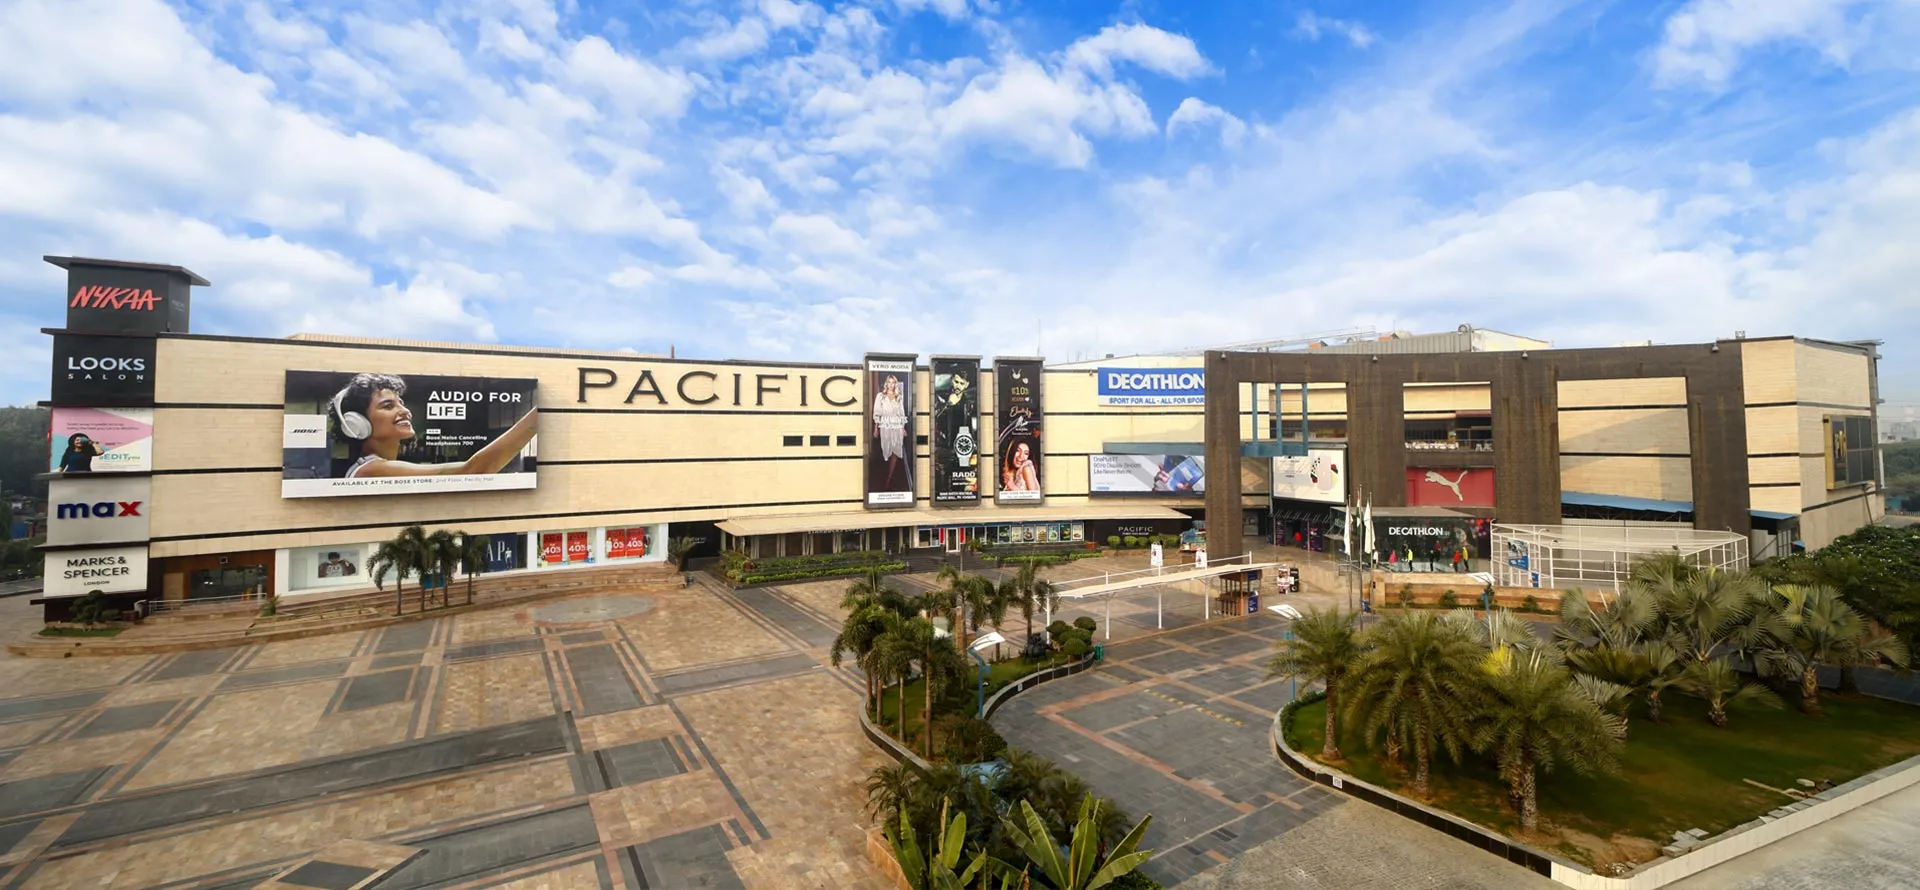 Pacific Mall Tagore Garden in India, central_asia | Fragrance,Shoes,Accessories,Clothes,Natural Beauty Products,Sportswear - Country Helper